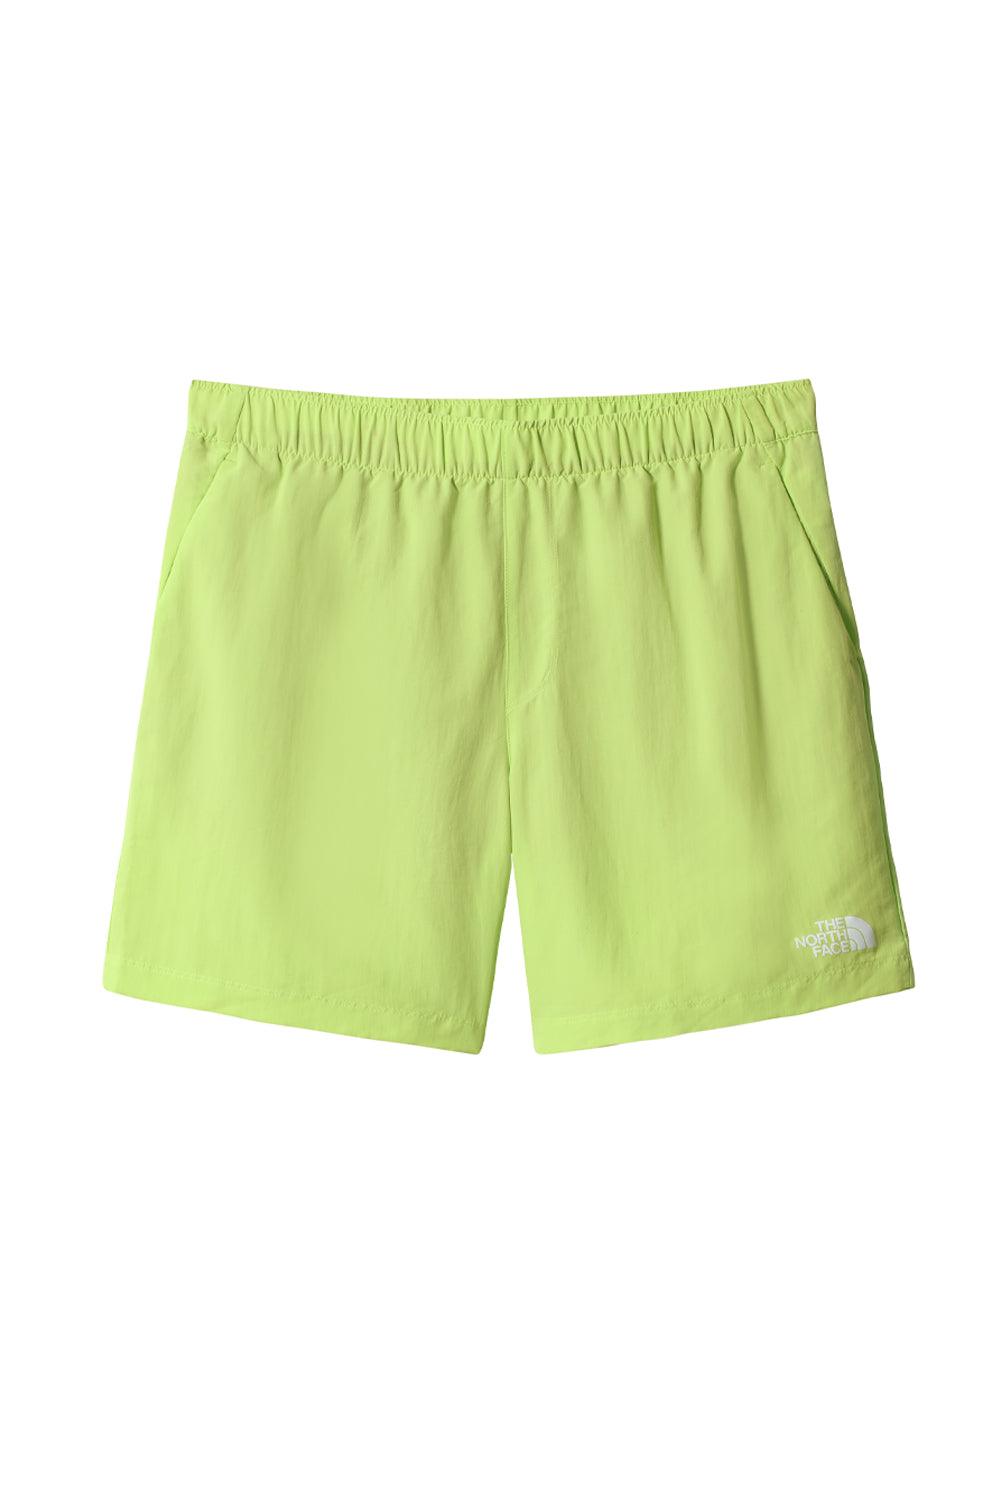 The North Face | Water Short Sharp Green | Milagron